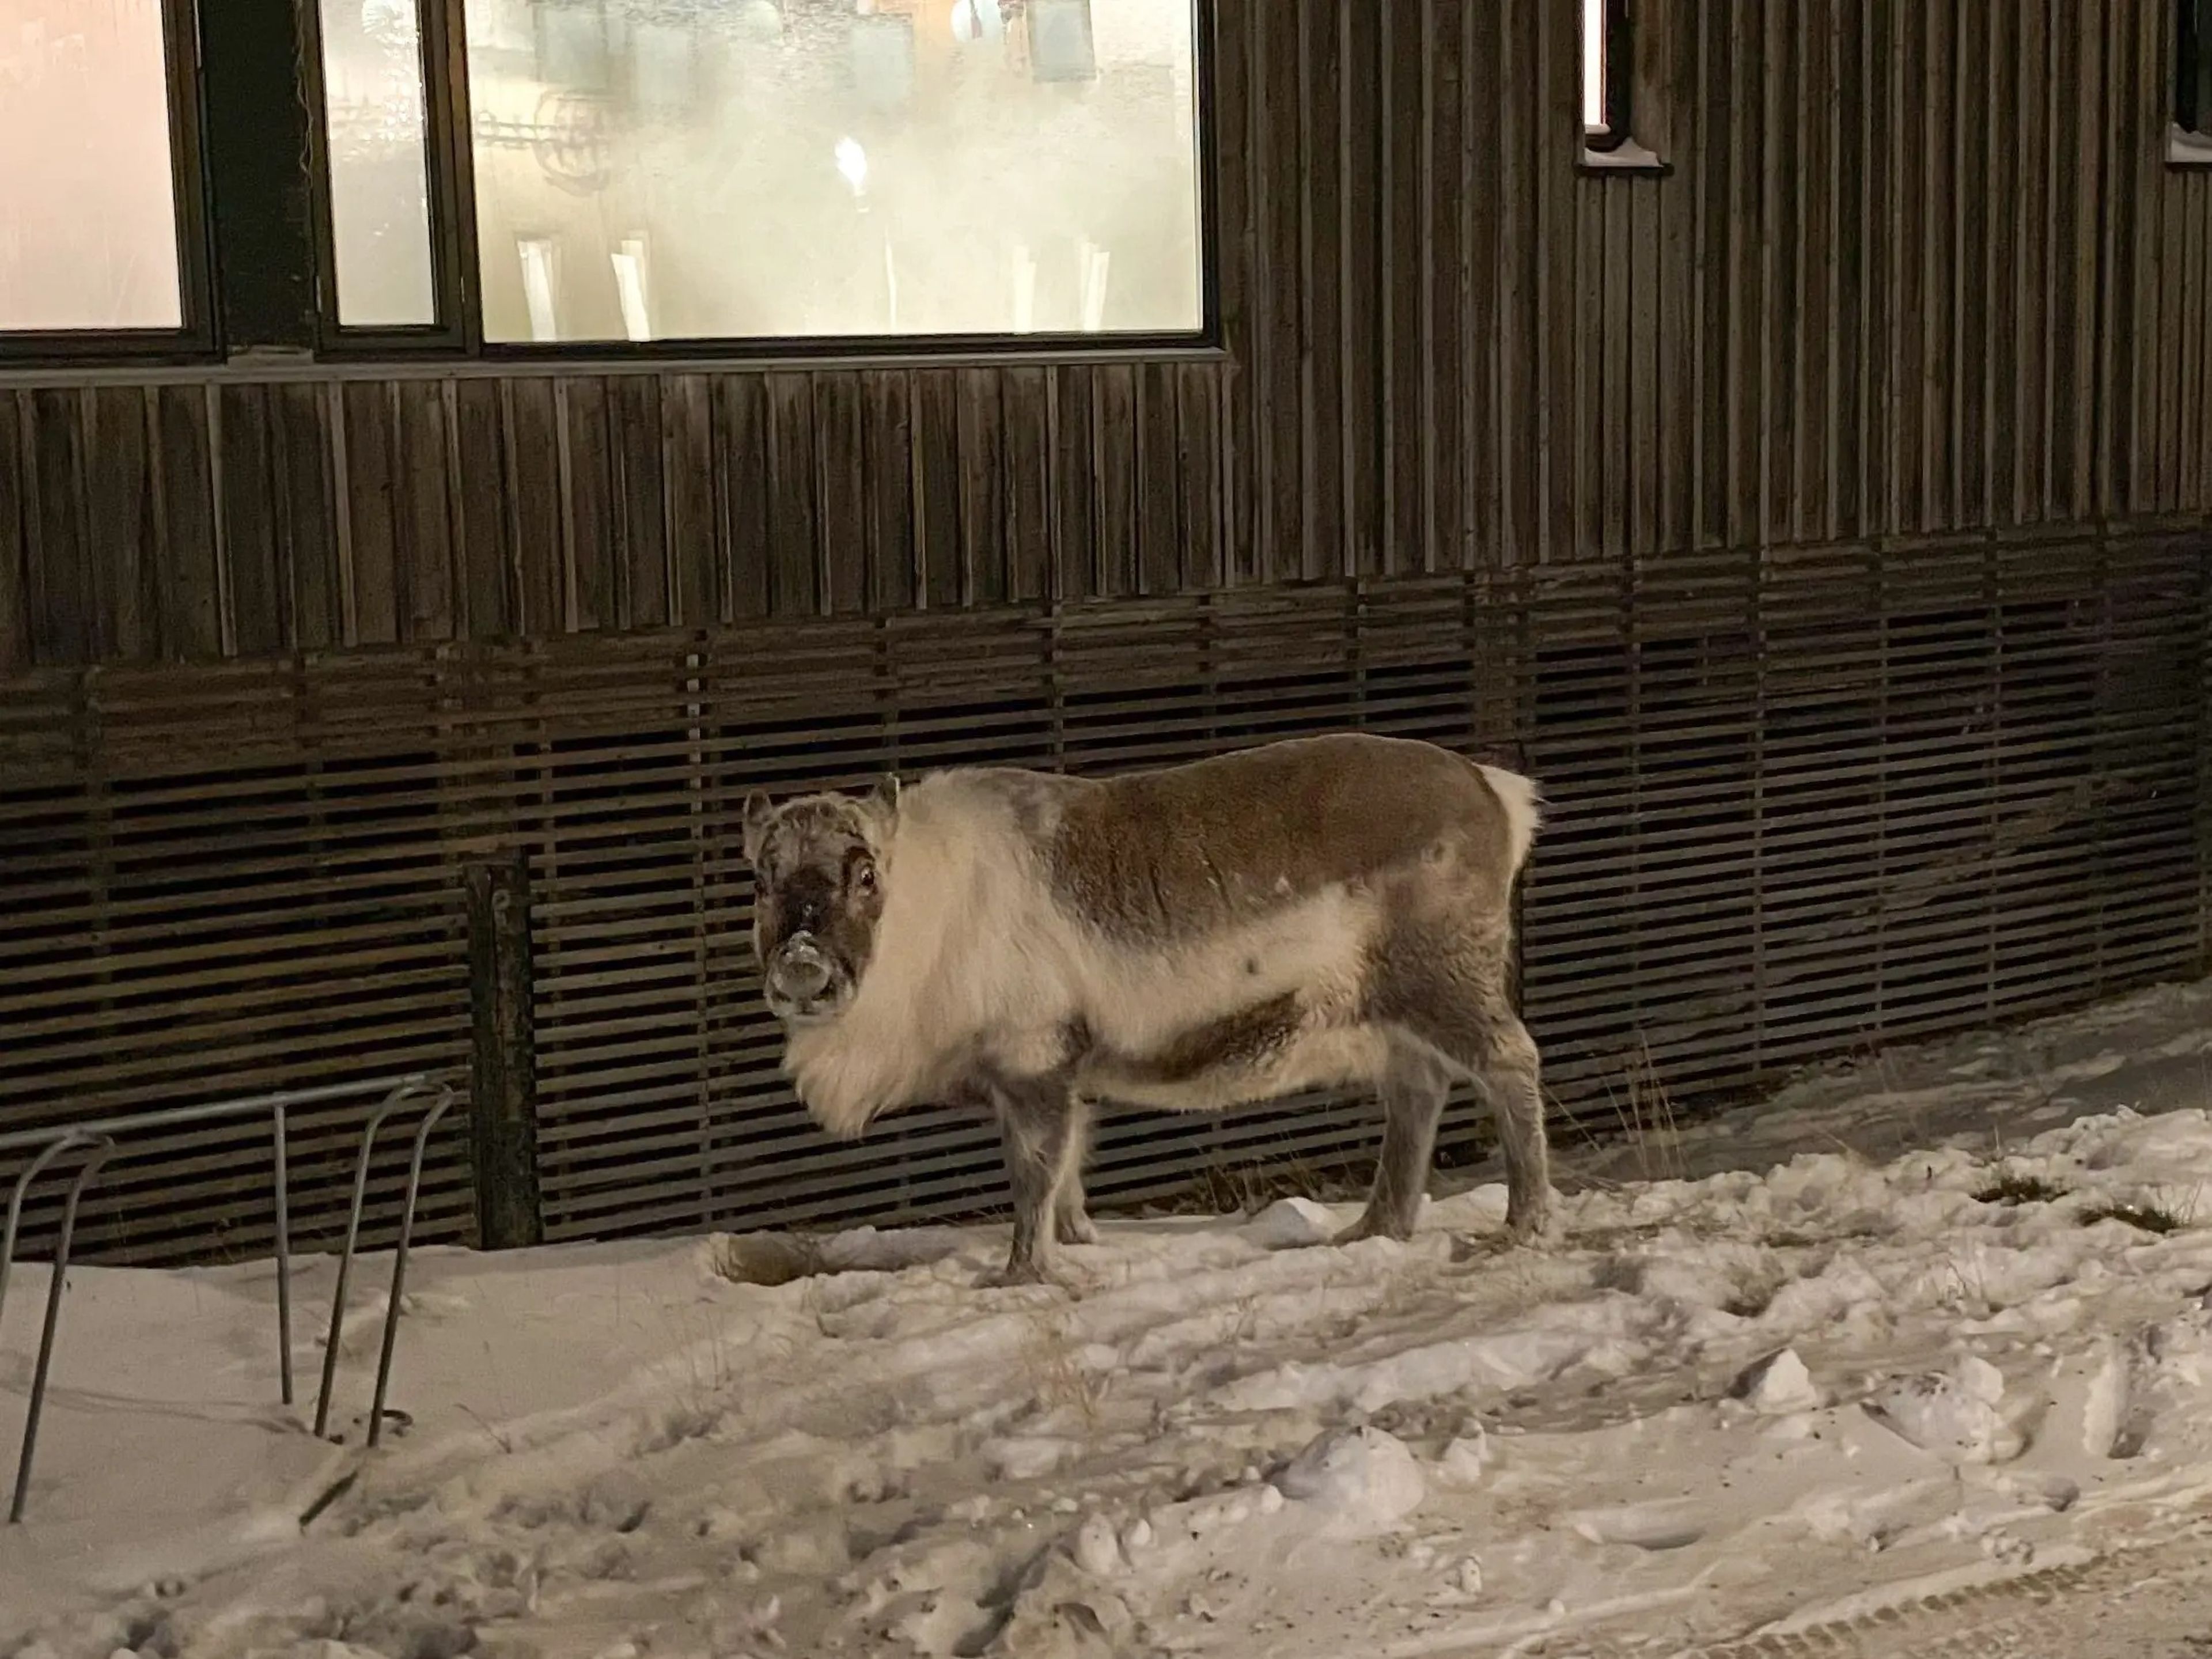 A reindeer on the side of a road